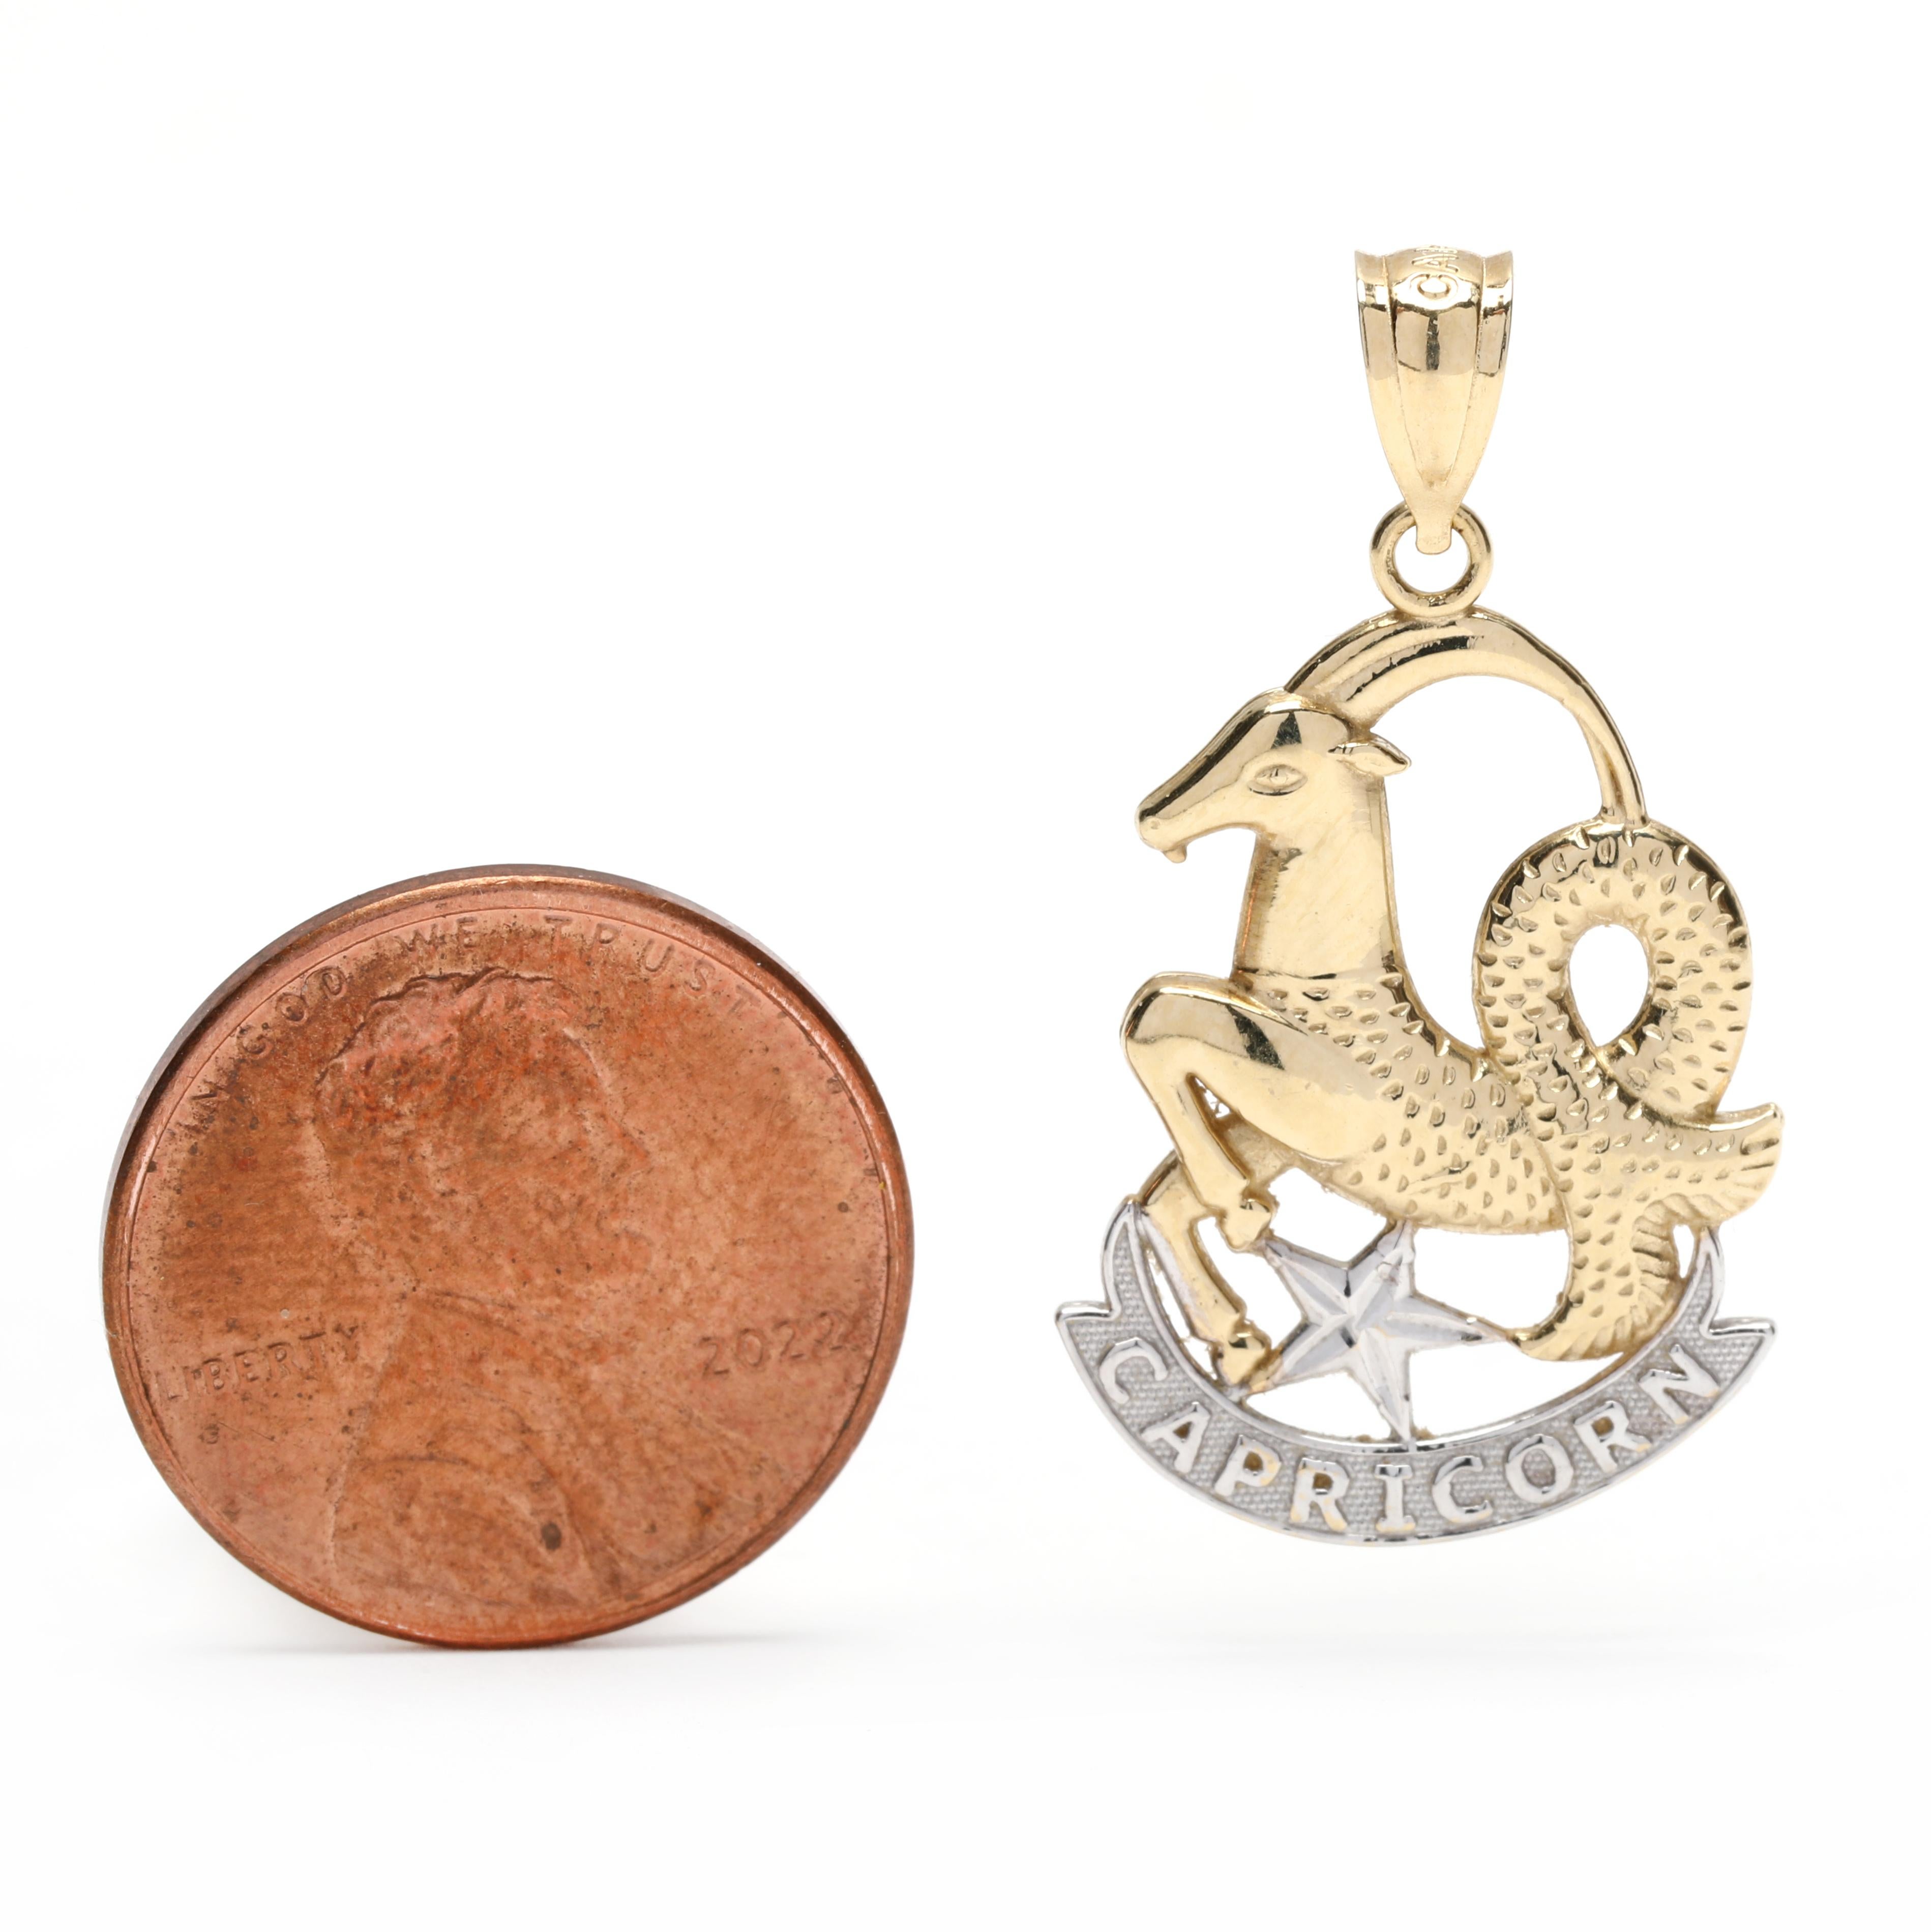 This beautiful vintage Zodiac Capricorn Pendant boasts classic style that will never go out of style. Crafted in 14K yellow gold, the pendant measures 1 1/8